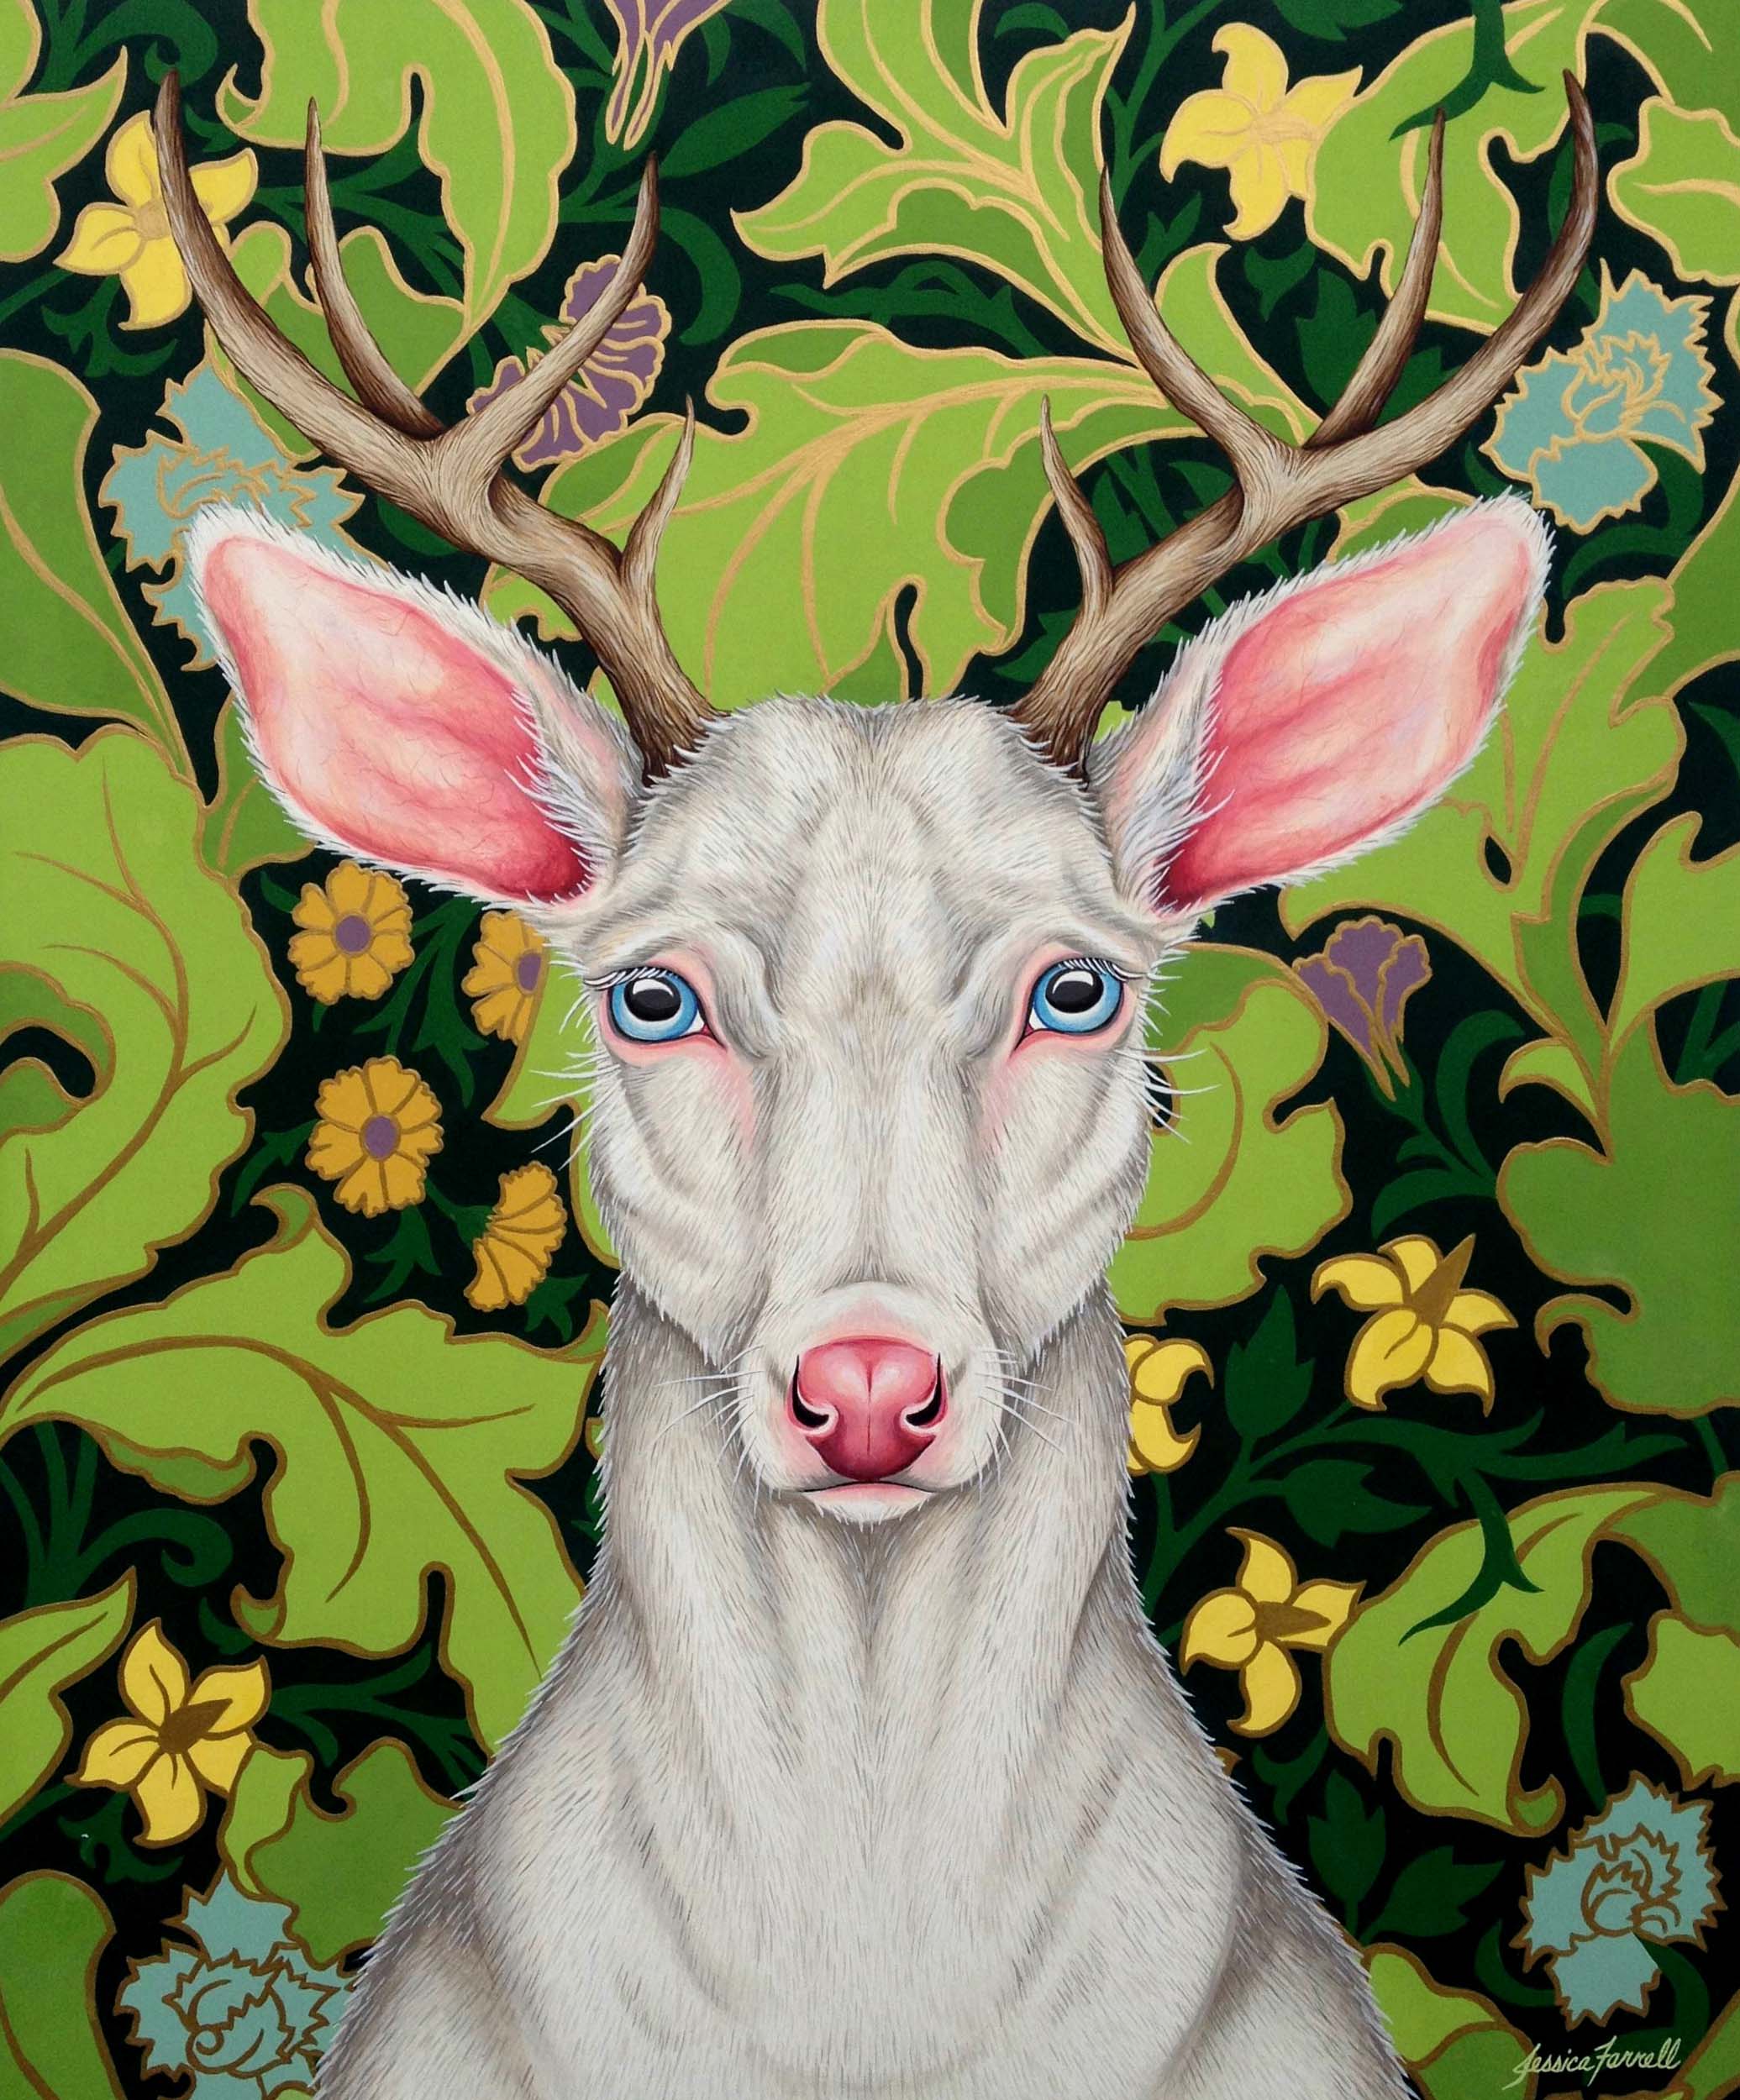   Albino Deer &nbsp; (private collection) 